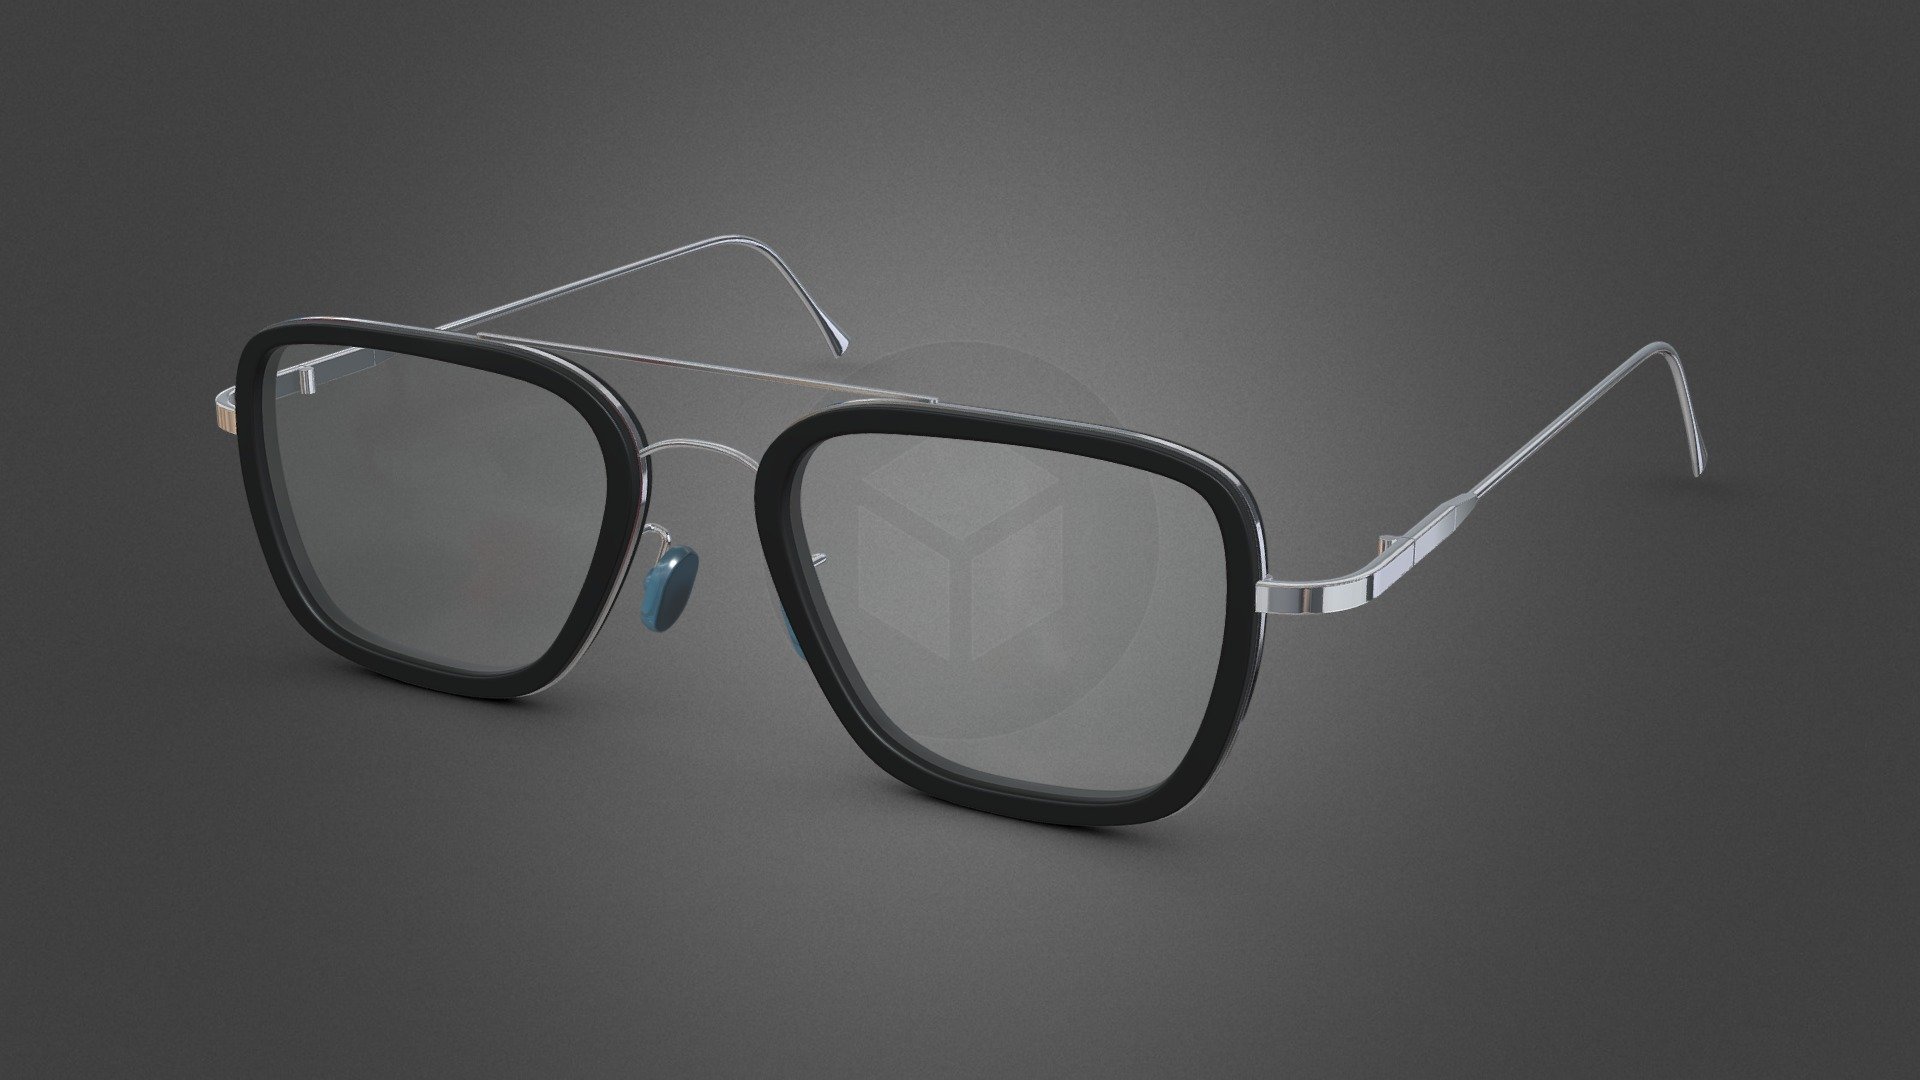 EDITH Glasses 3d model



EDITH glasses - From Spider Man Far From Home

High quality ✅

Materials  ✅

as close to the original item as possible ✅

High Poly ✅

subdivision ready ✅
 - EDITH Glasses - From Spider Man - Buy Royalty Free 3D model by DAVID.3D.ART (@david3dart) 3d model